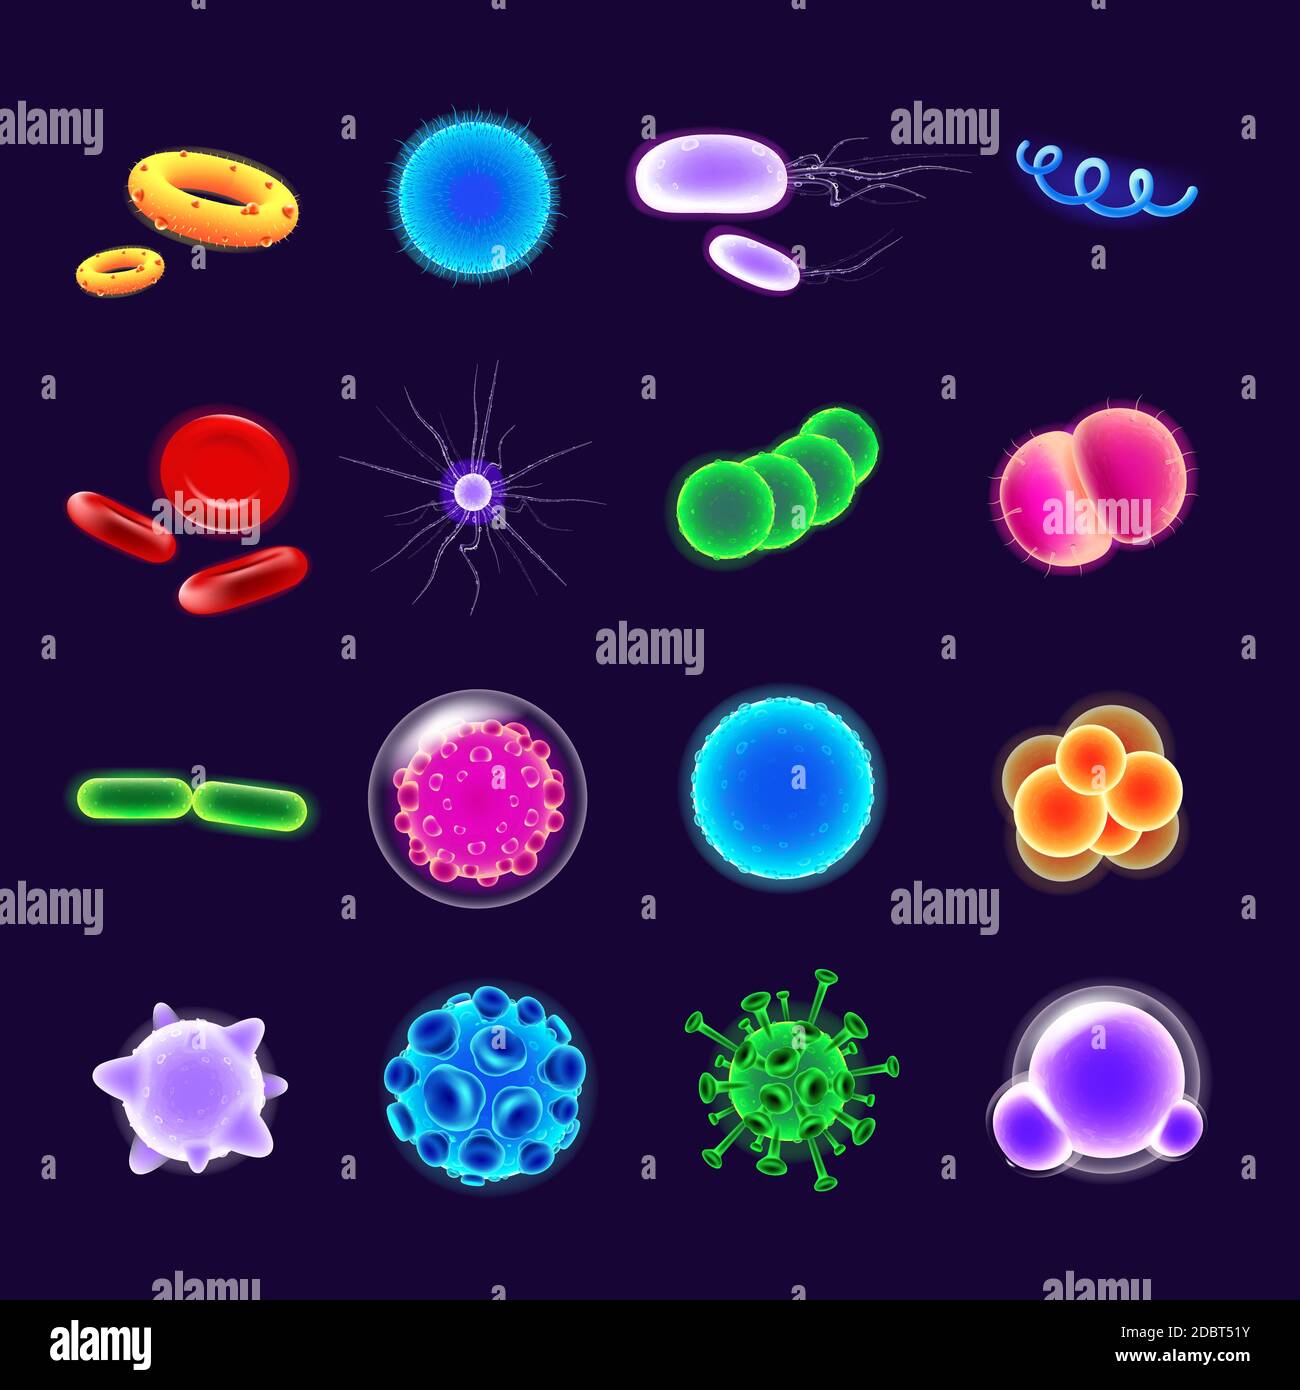 Bacteria realistic vector icons set. Pathogen illustration. Microbiological research. 3d isolated color microorganisms of various shapes under microsc Stock Photo